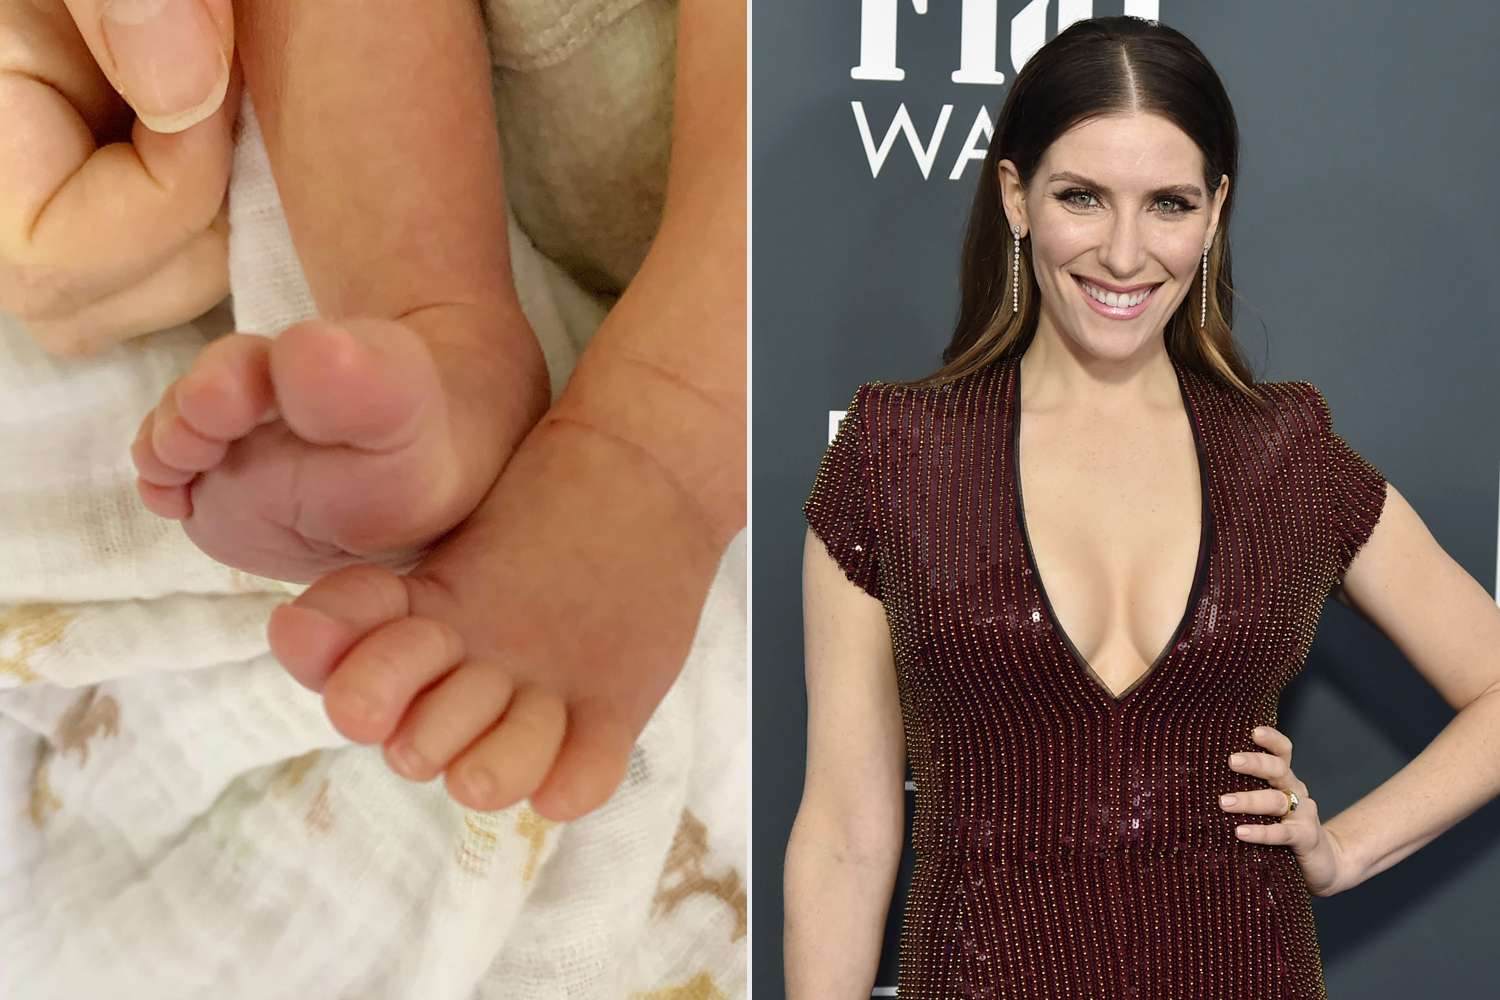 sarah levy welcomes first baby. https://www.instagram.com/p/Cfo68-jJwM1/. ; SANTA MONICA, CA - JANUARY 12: Sarah Levy during the arrivals for the 25th Annual Critics' Choice Awards at Barker Hangar on January 12, 2020 in Santa Monica, CA. (Photo by David Crotty/Patrick McMullan via Getty Images)